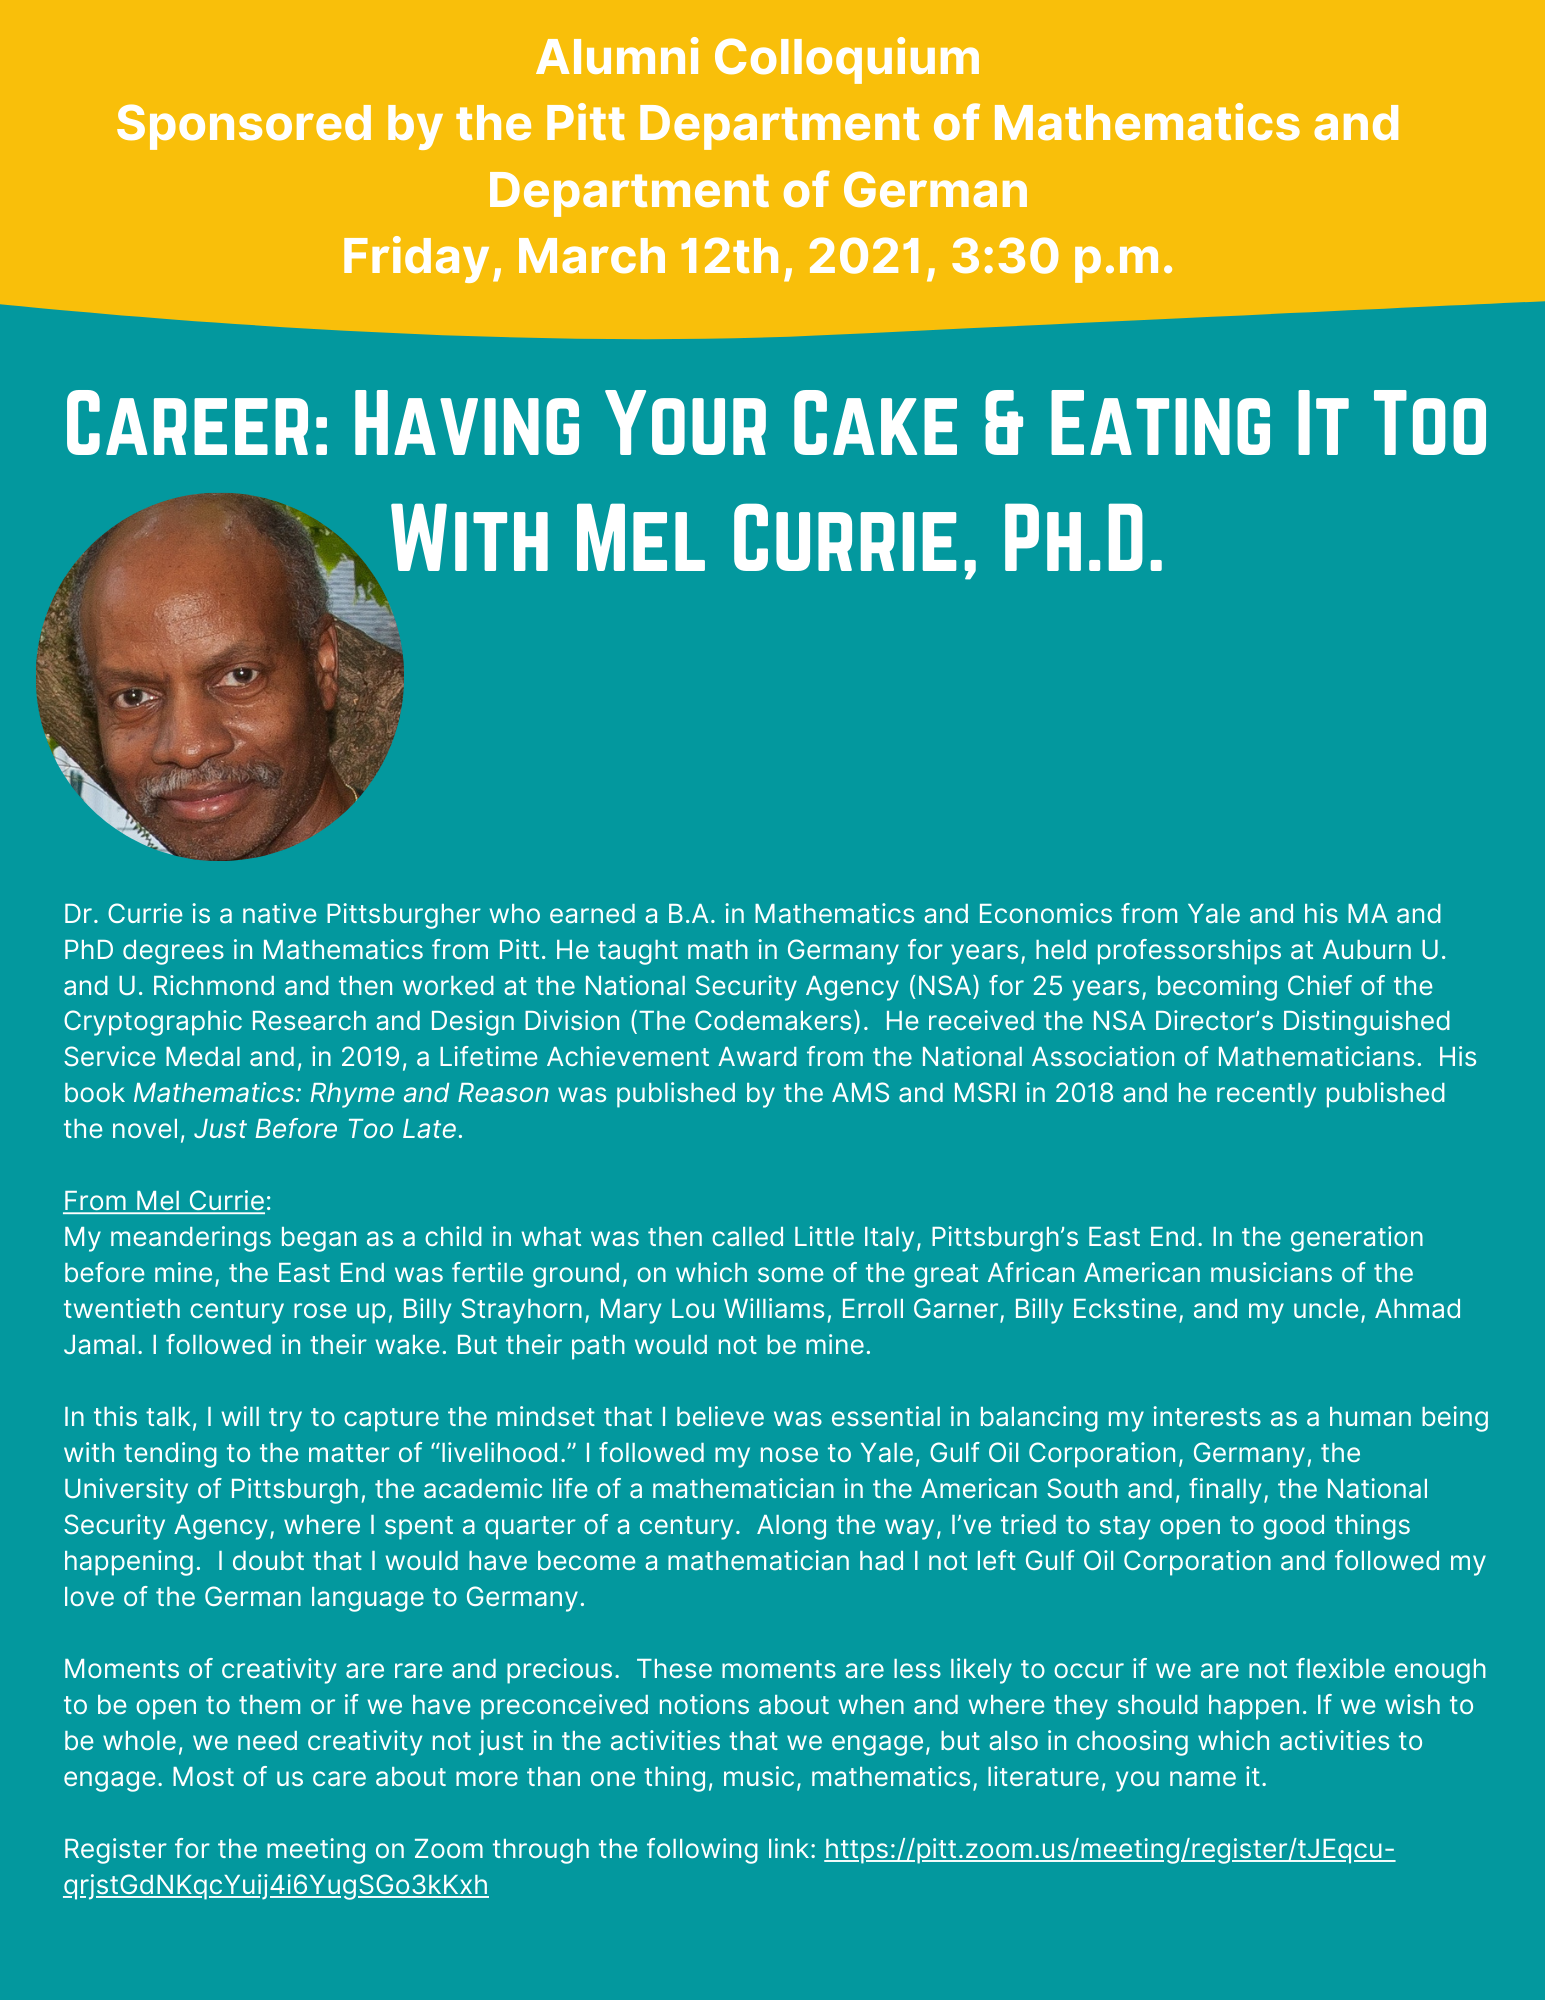 Event Flyer for Mel Currie event with a photo of Mel Currie and a teal and mustard background. 